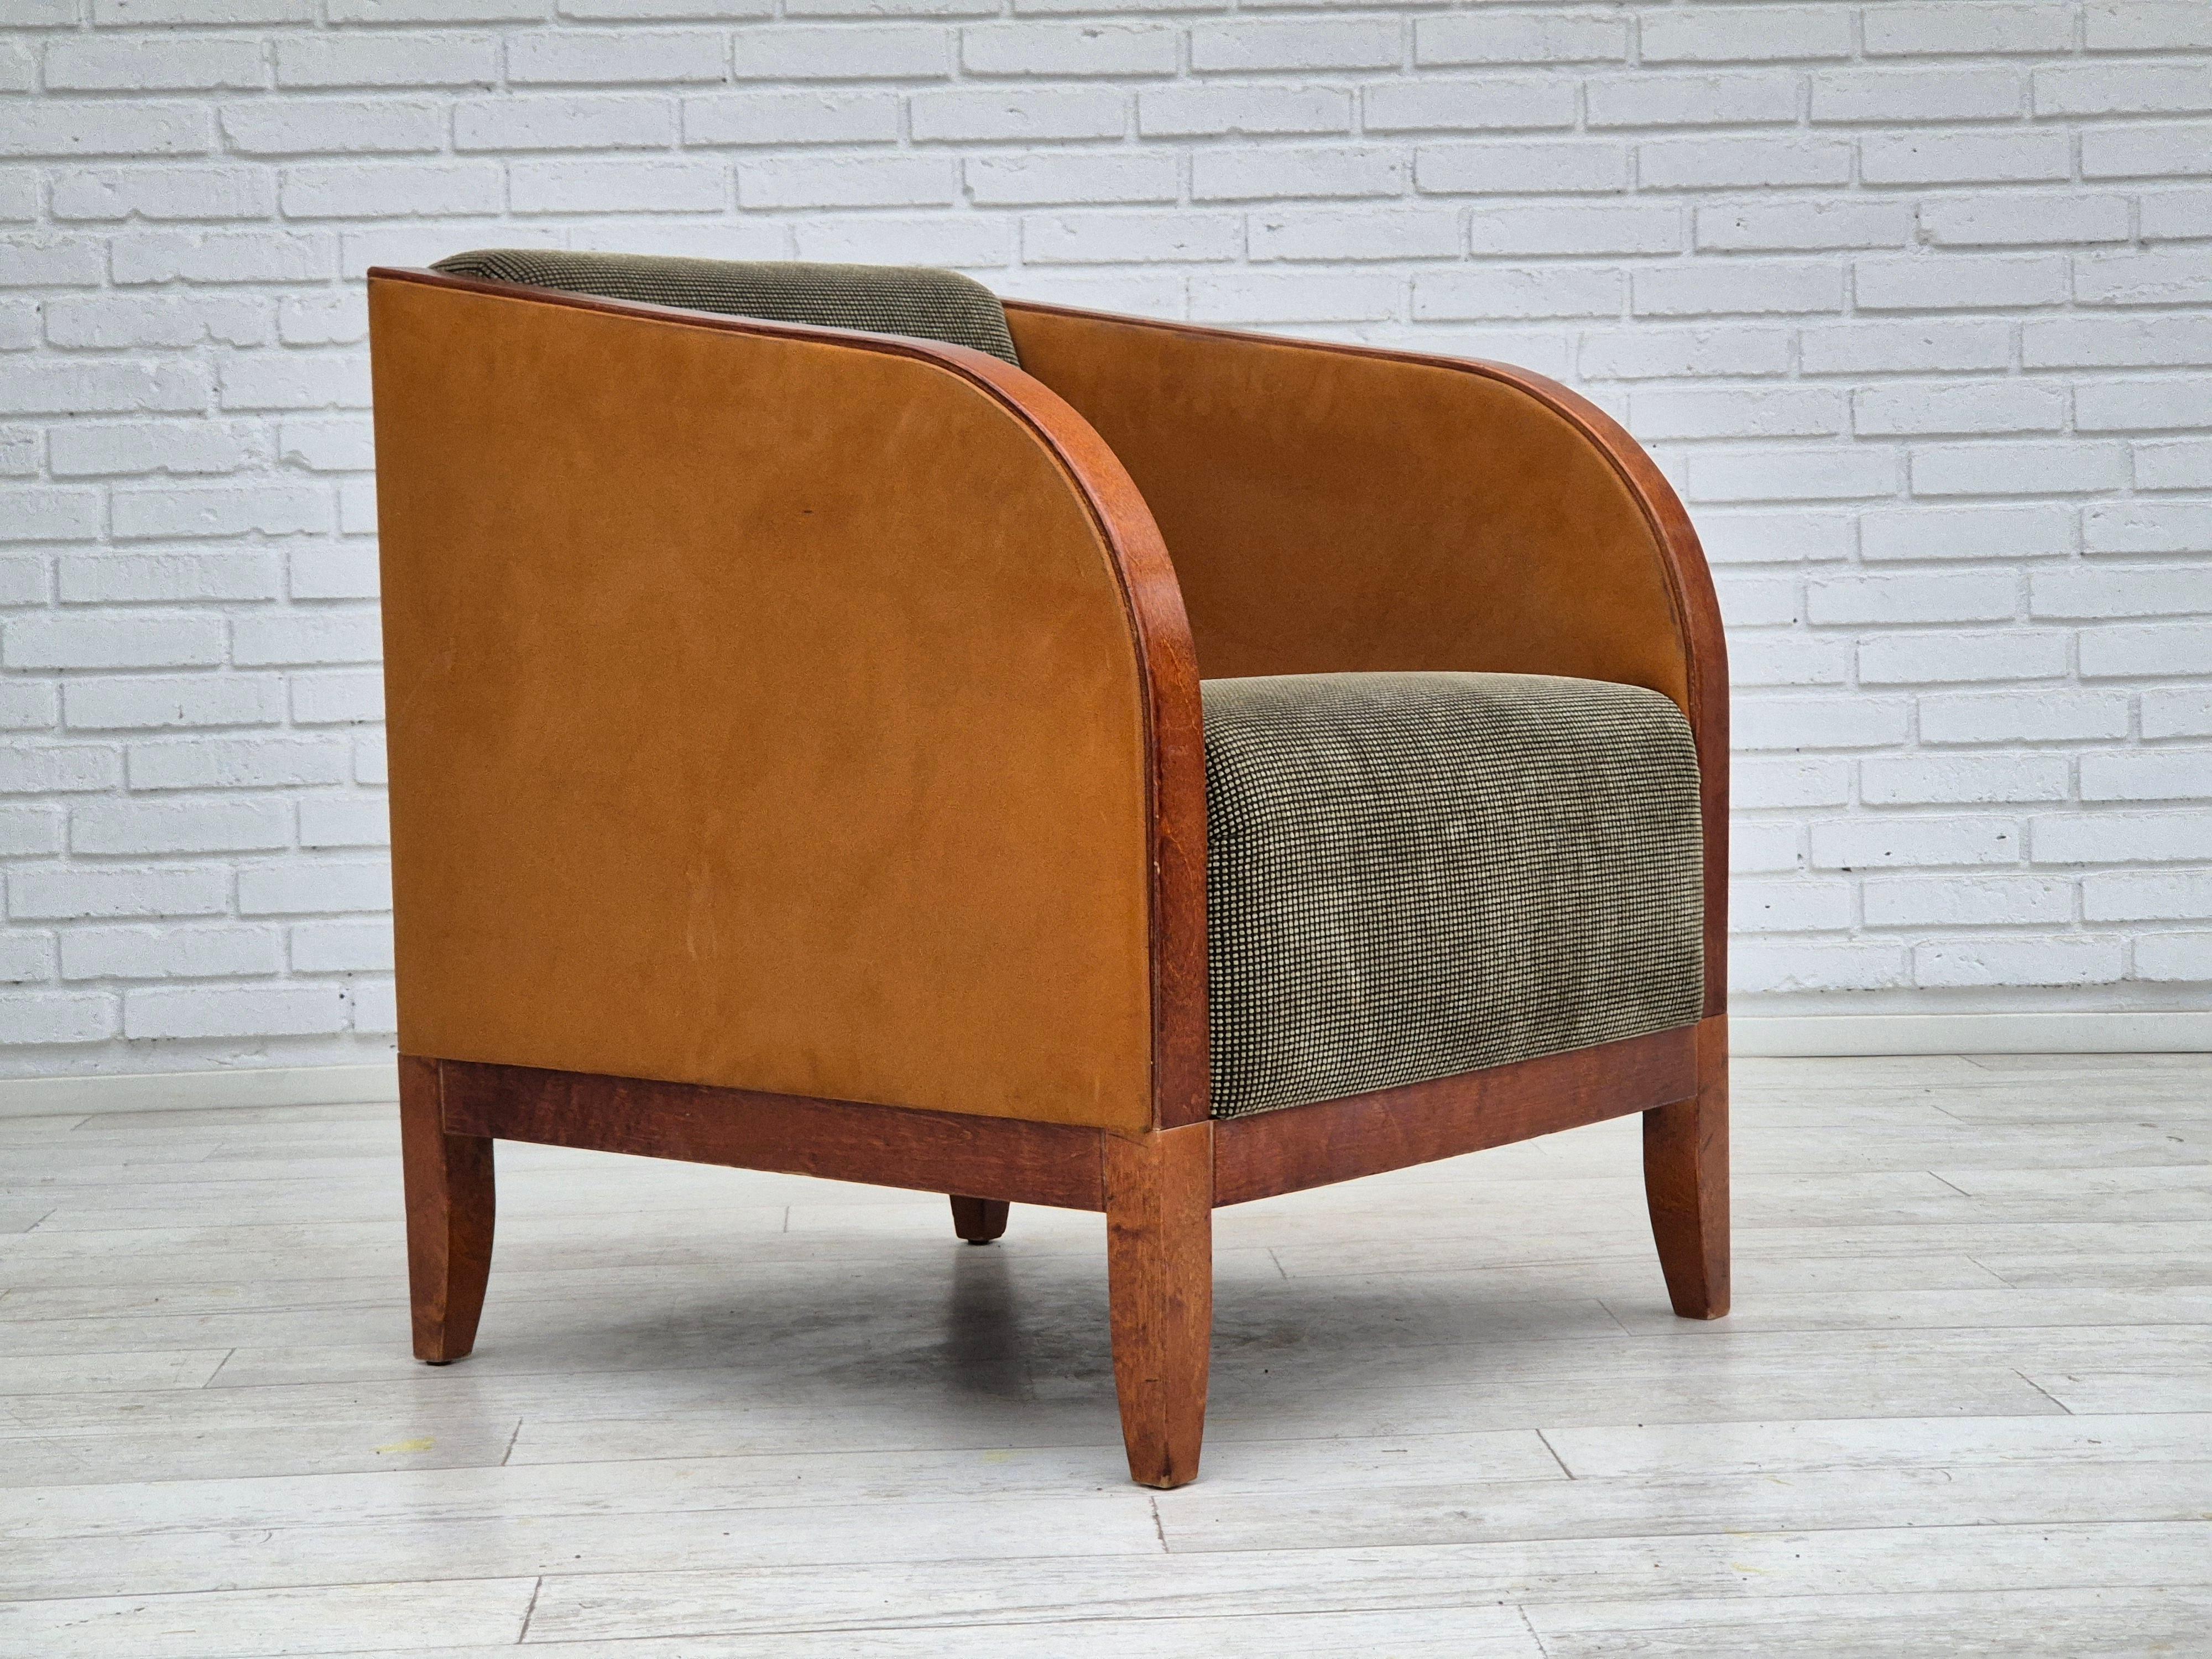 1970s, Scandinavian lounge chair in original very good condition: no smells and no stains. Art deco style from Sweden. Nubuck leather and bent wood on the armrests. Furniture fabric on the seat, ash wood legs and back. Manufactured by Swedish